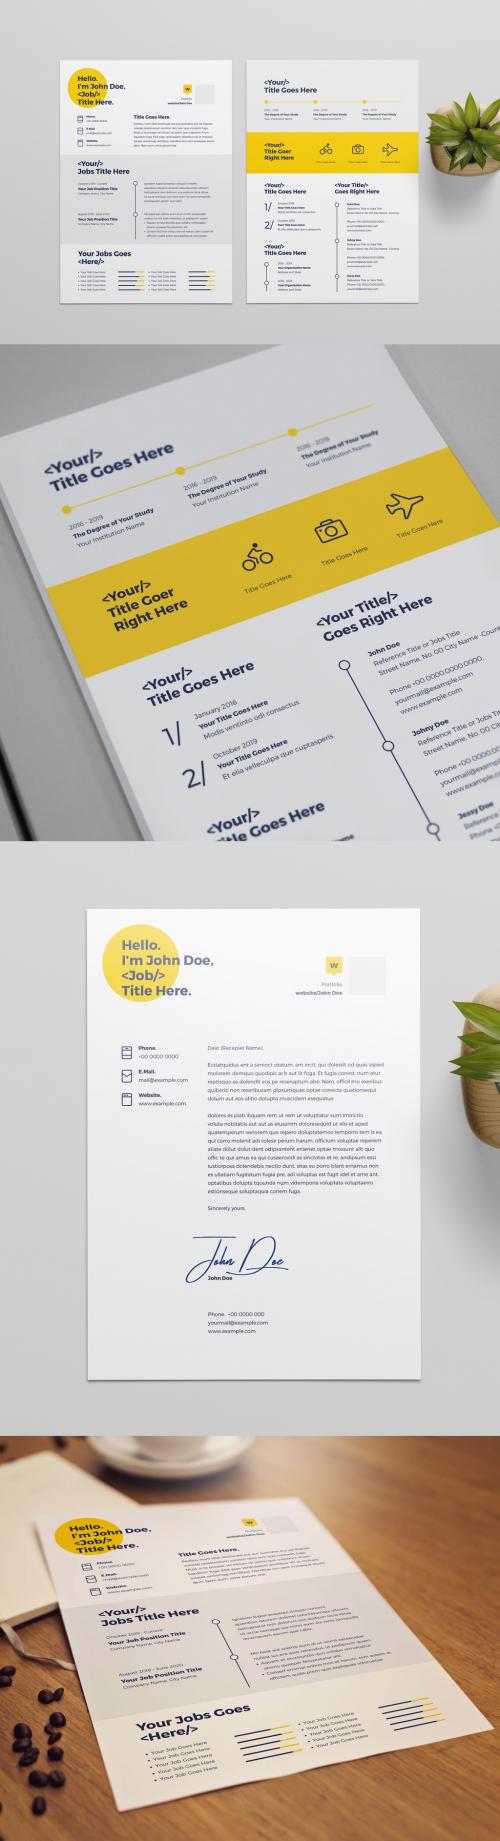 Adobe Stock - Resume Layout with Yellow Accents - 221458322